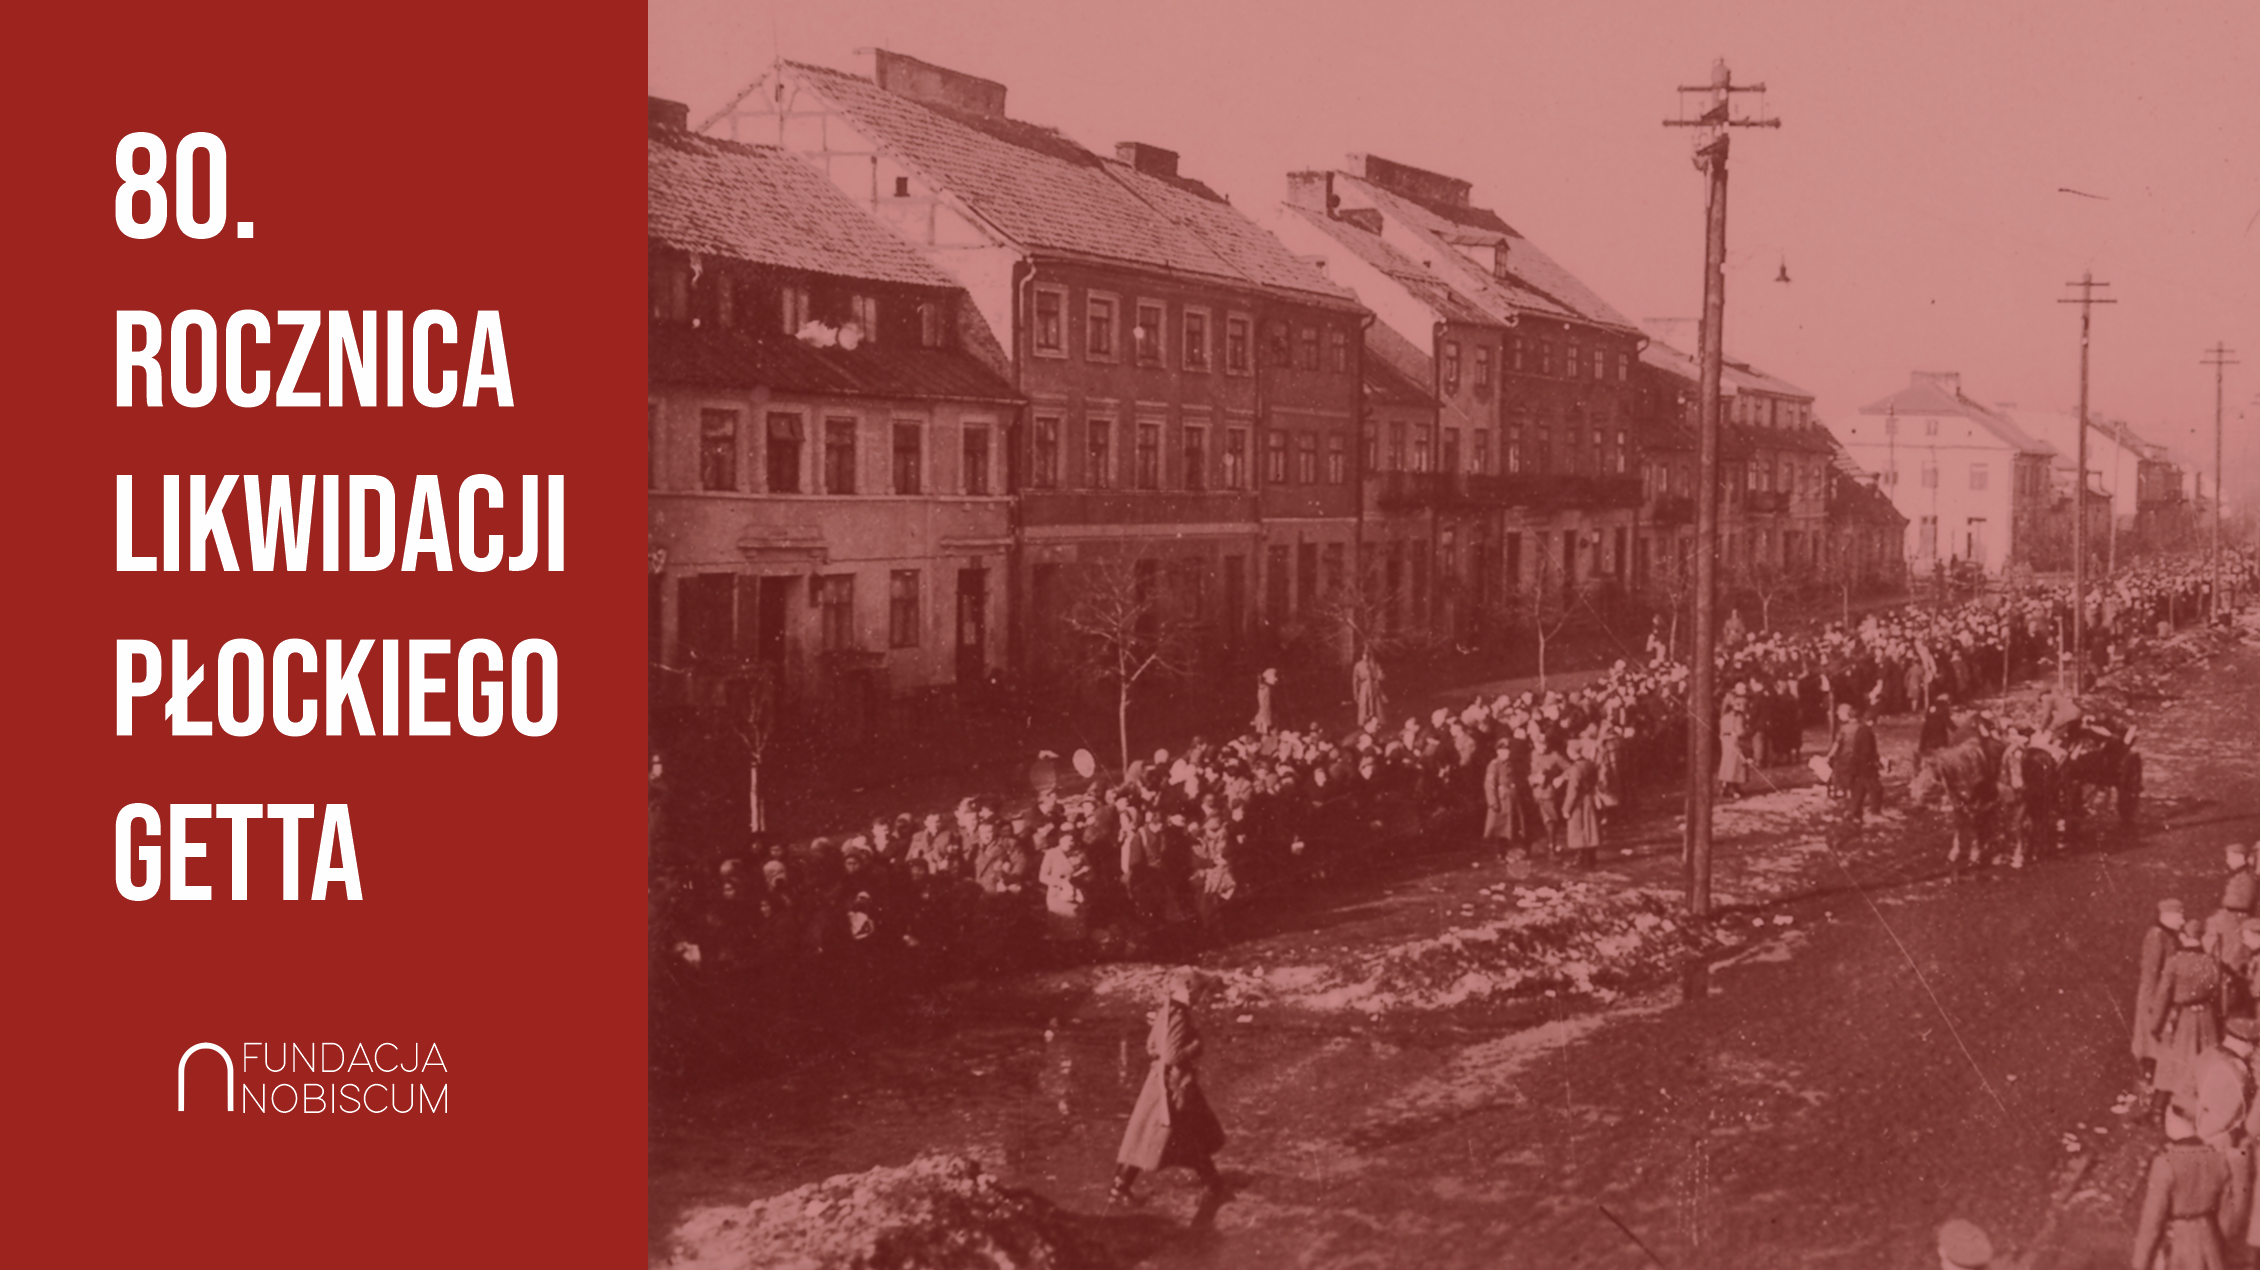 Premiere of the film “Into the abyss of shadows” and the exhibition “The Jews of Płock 1939-1945”